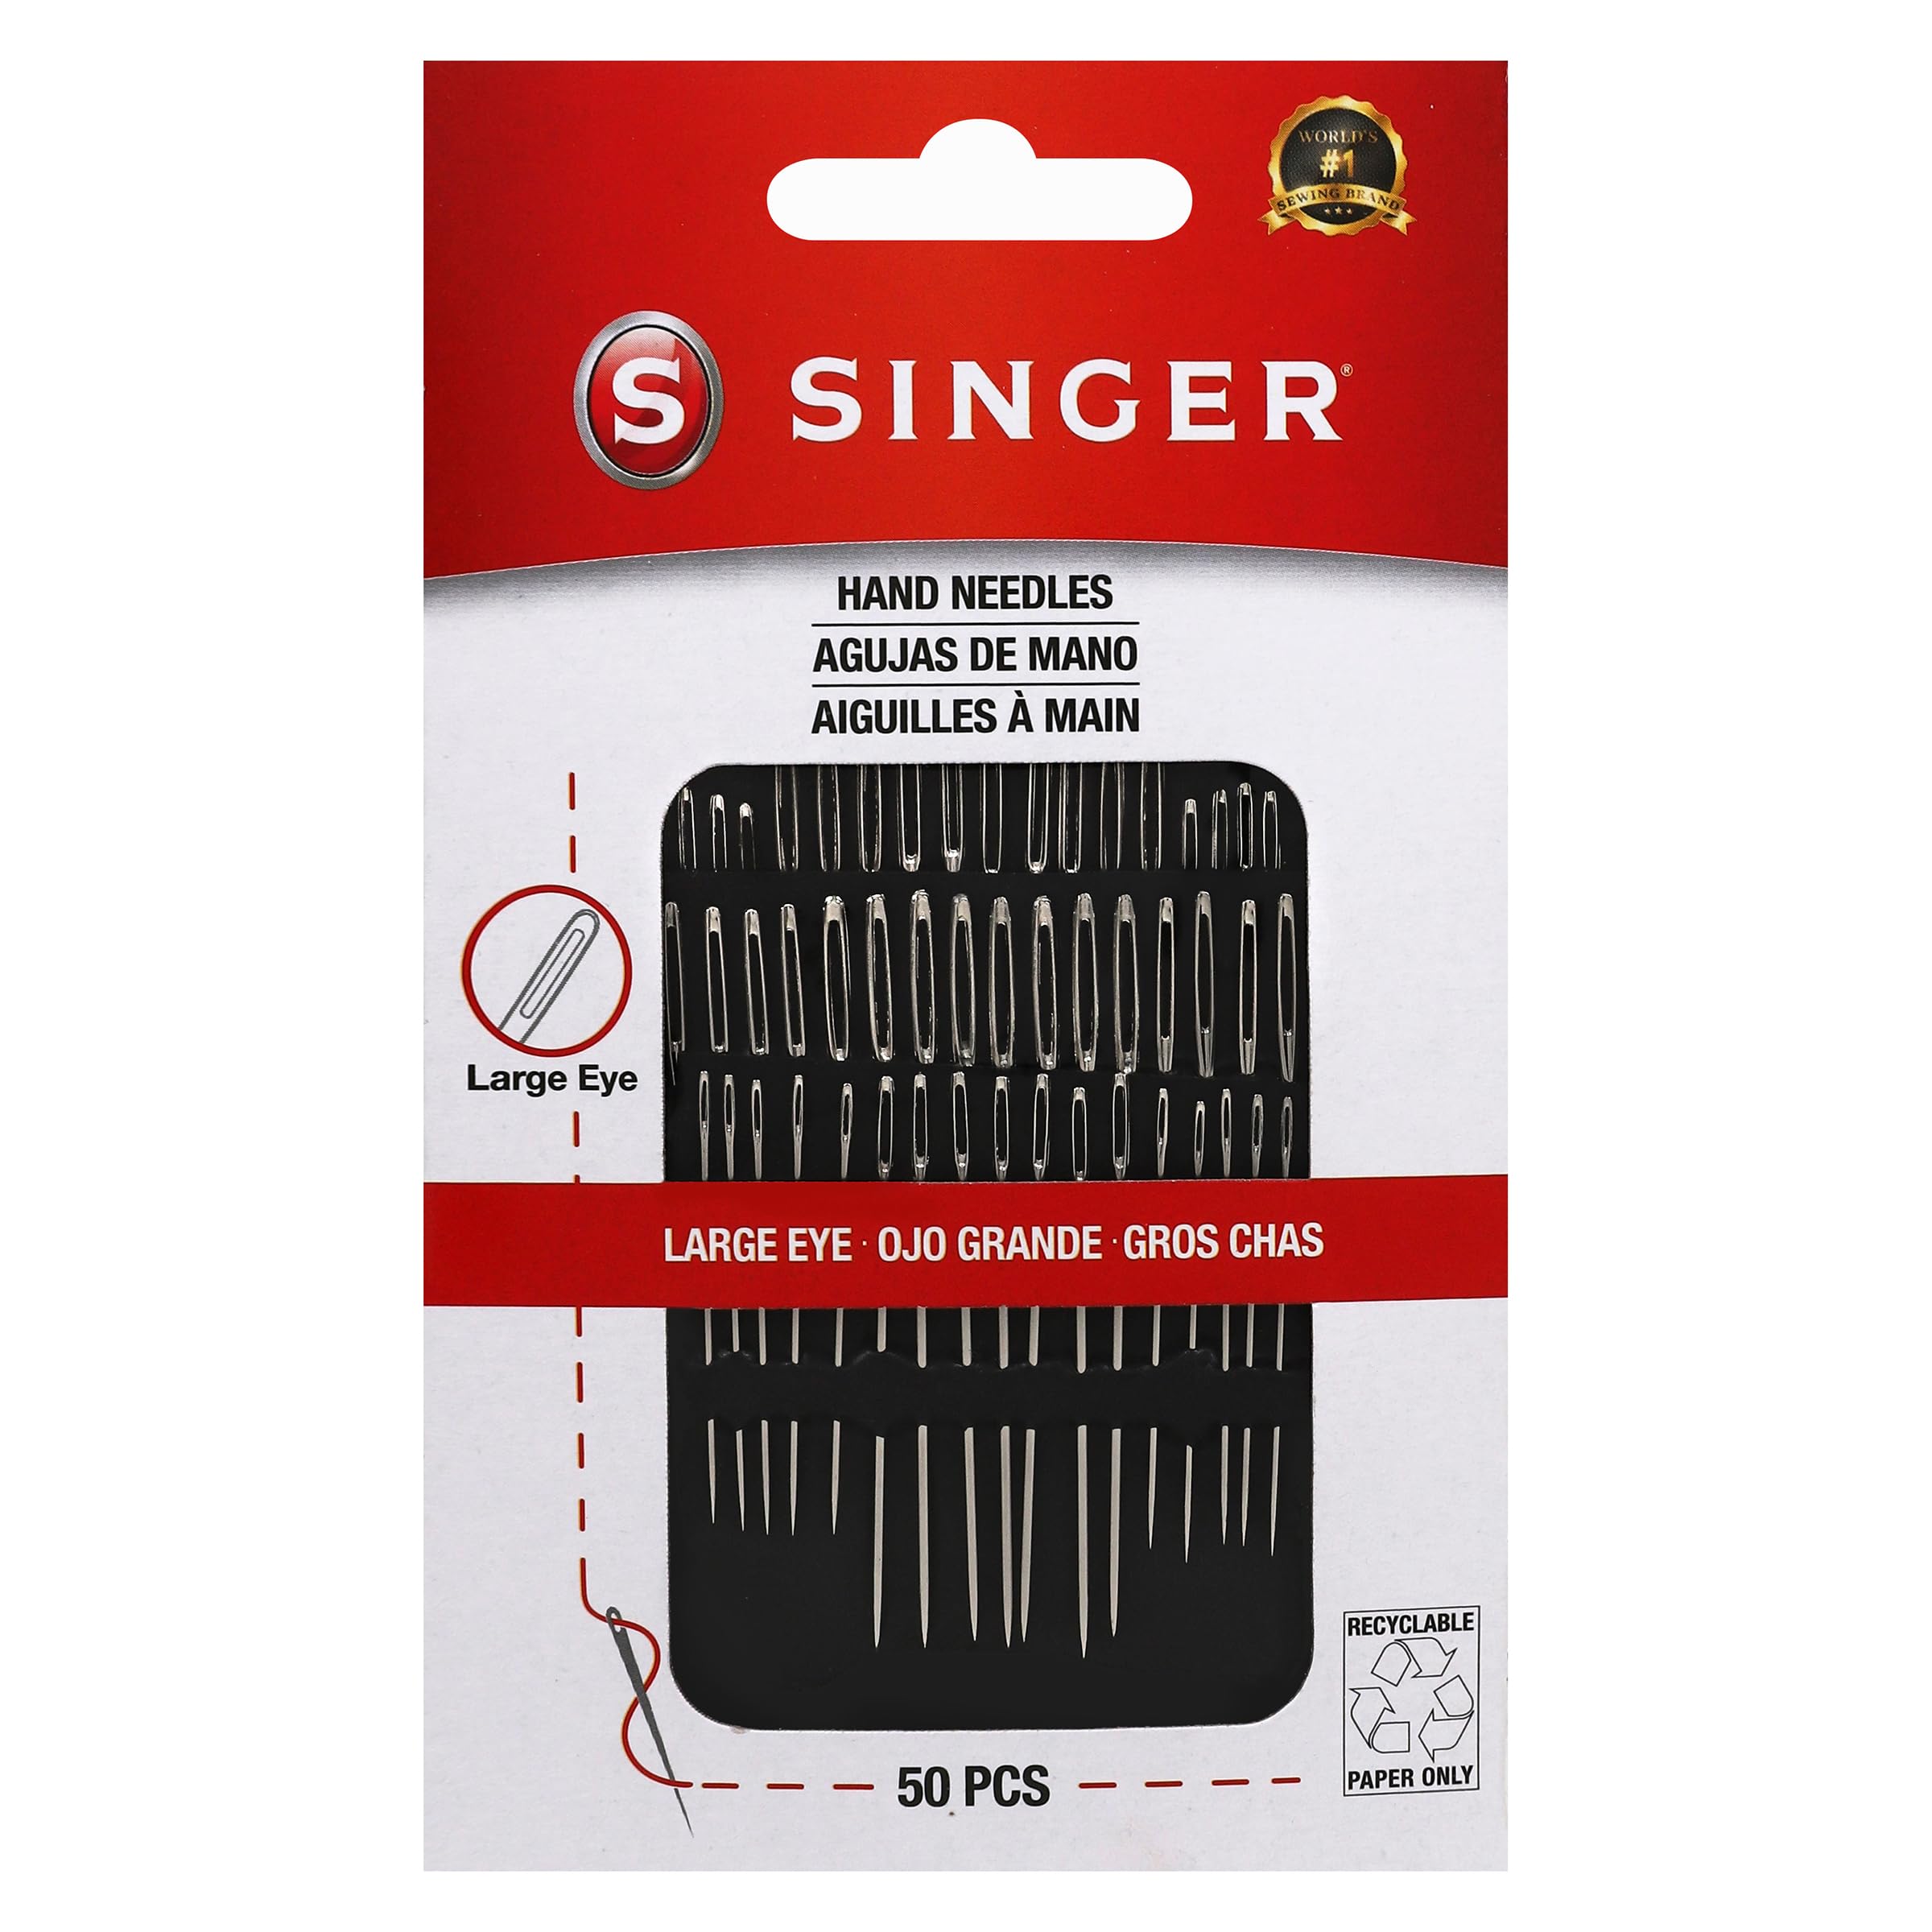 SINGER 50ct Assorted Large Eye Needles for Hand Sewing, Self-Threading Sewing Needles, 6 Sizes